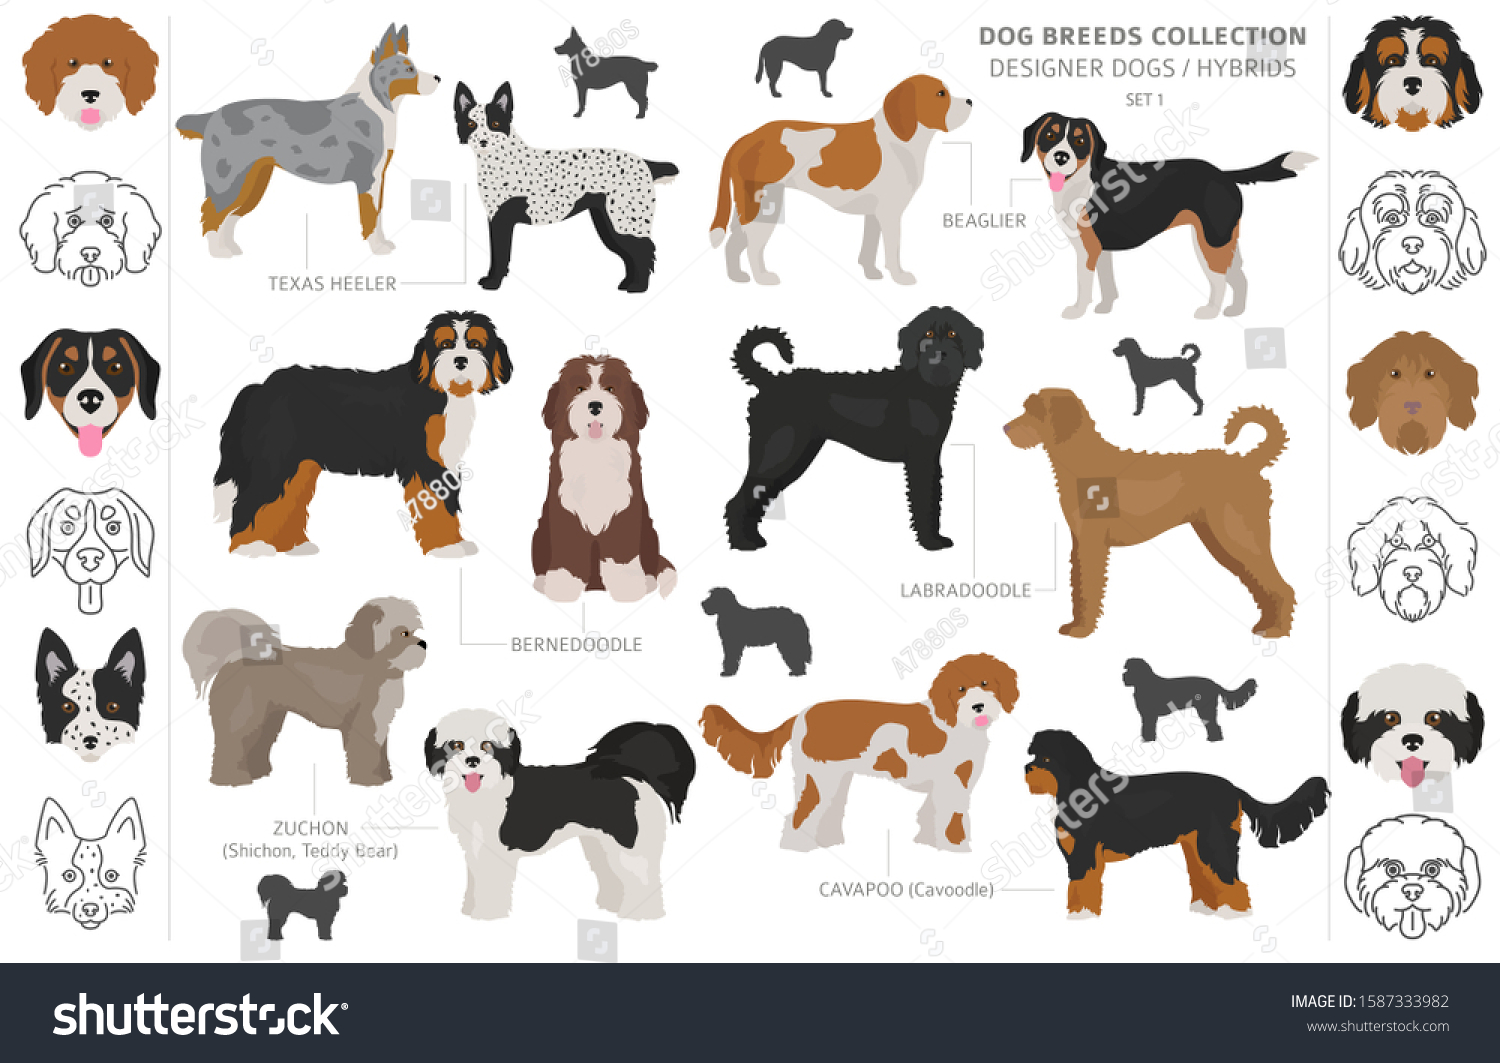 SVG of Designer dogs, crossbreed, hybrid mix pooches collection isolated on white. Flat style clipart dog set. Vector illustration svg